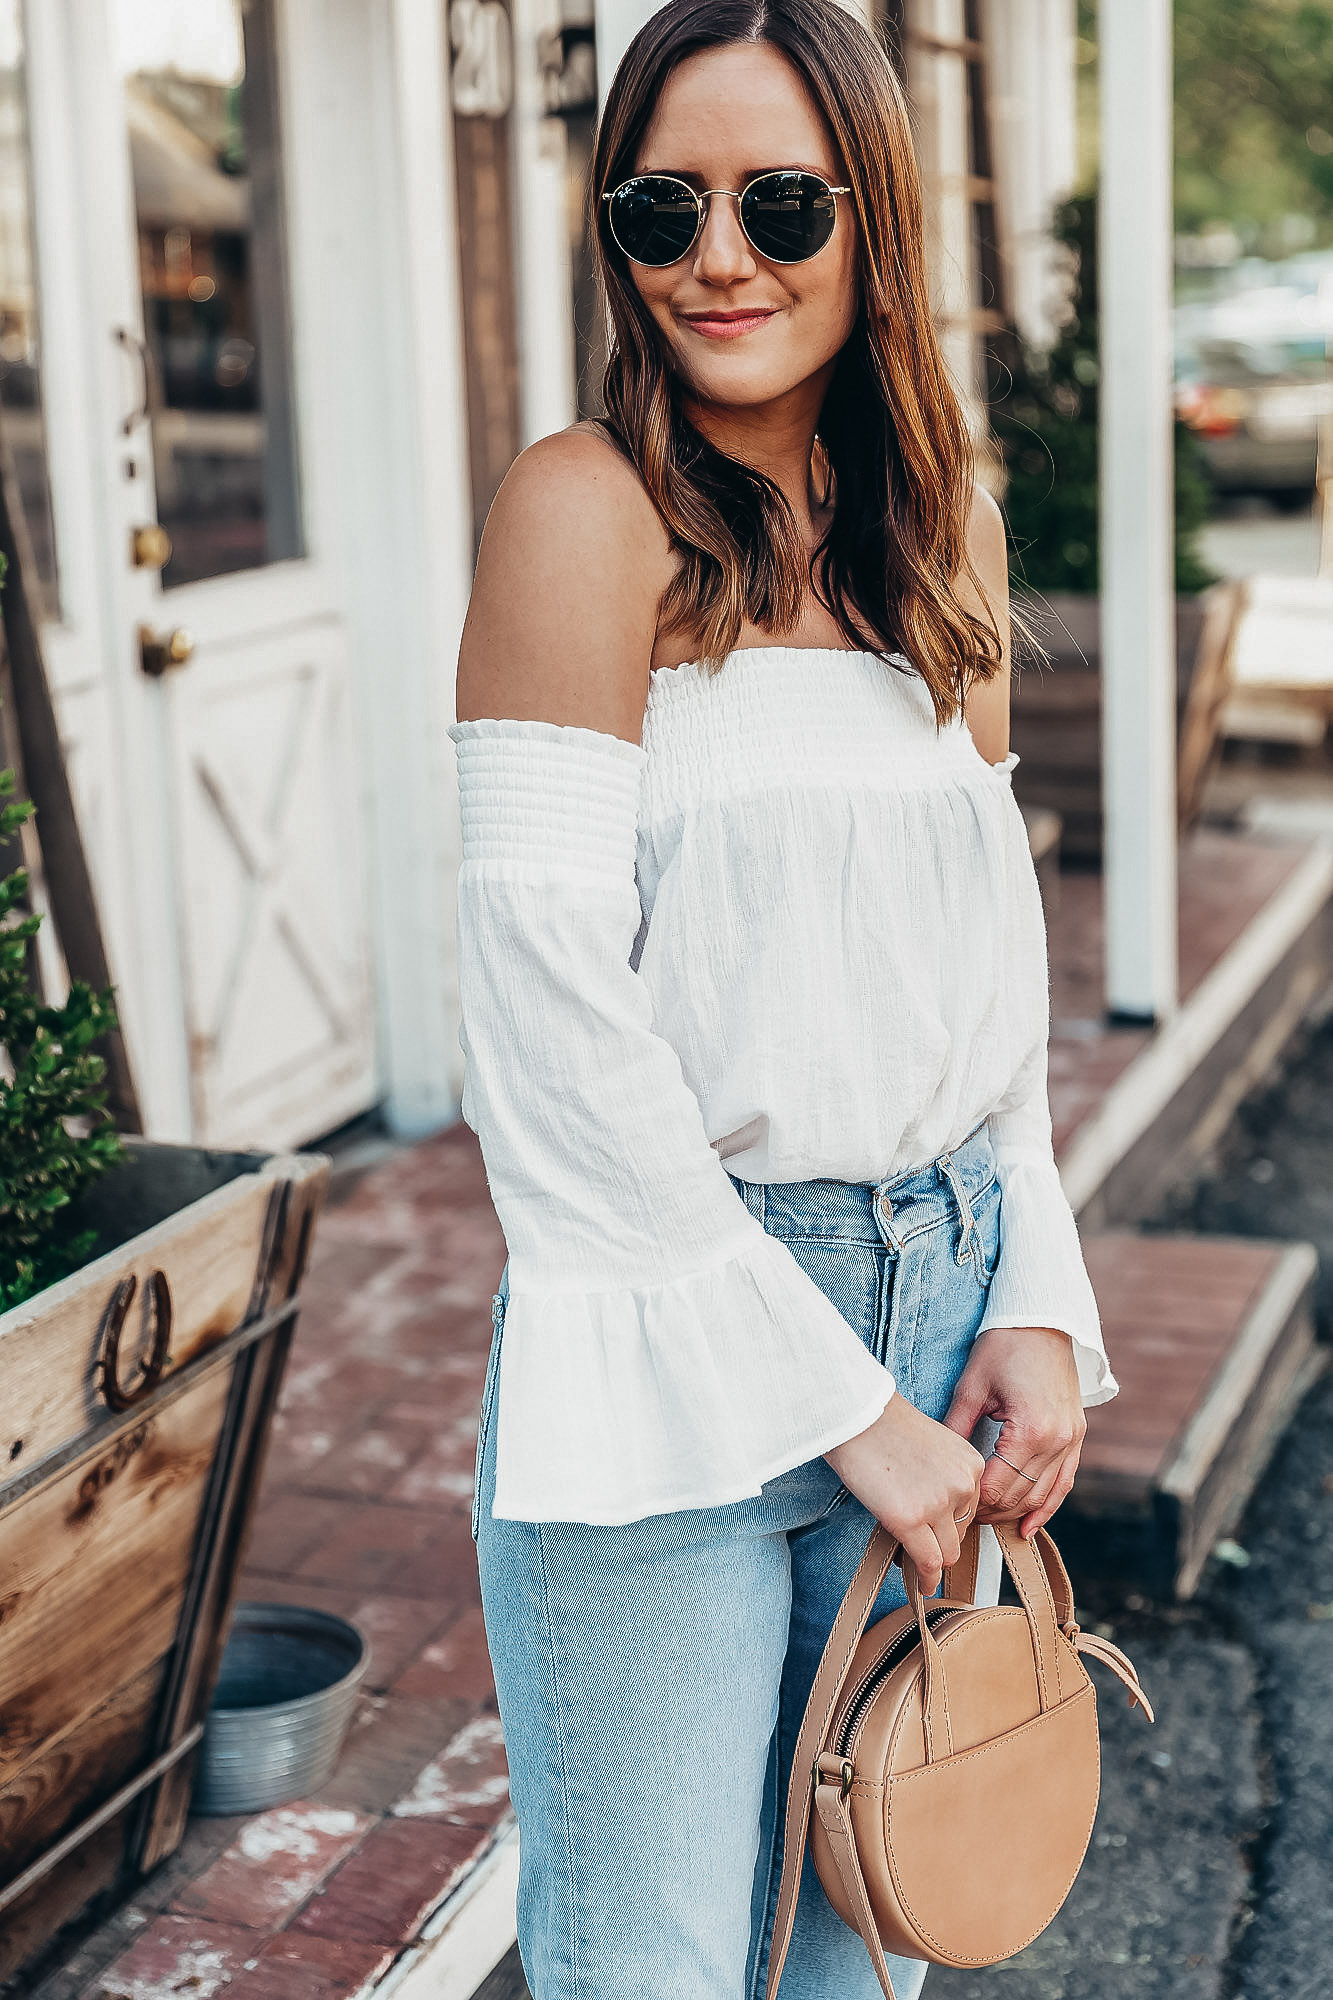 Summer Denim: White Cotton Top and Lace-up Sandals — Girl Meets Gold